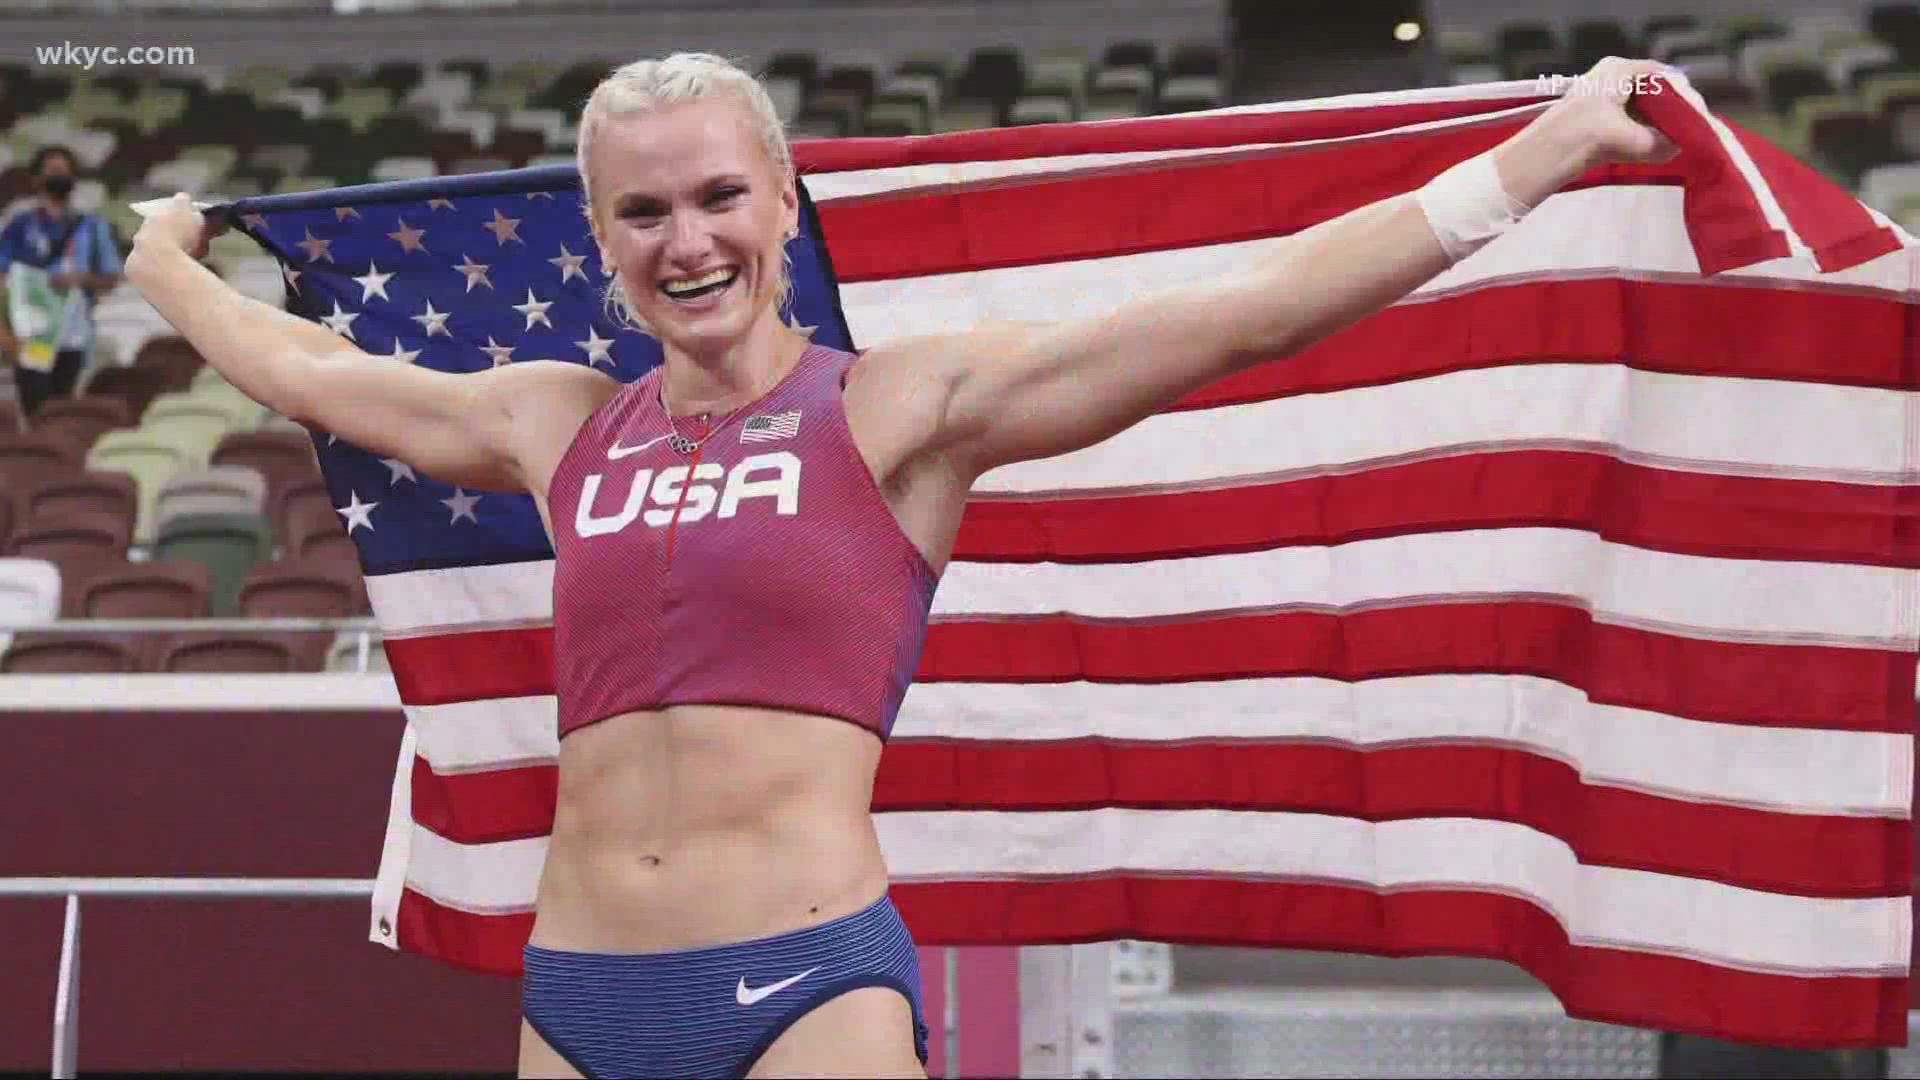 Katie Nageotte is a gold medal Olympian! The 30-year-old Olmsted Falls native won her medal after topping the women's pole vault finals at the Tokyo Olympics.